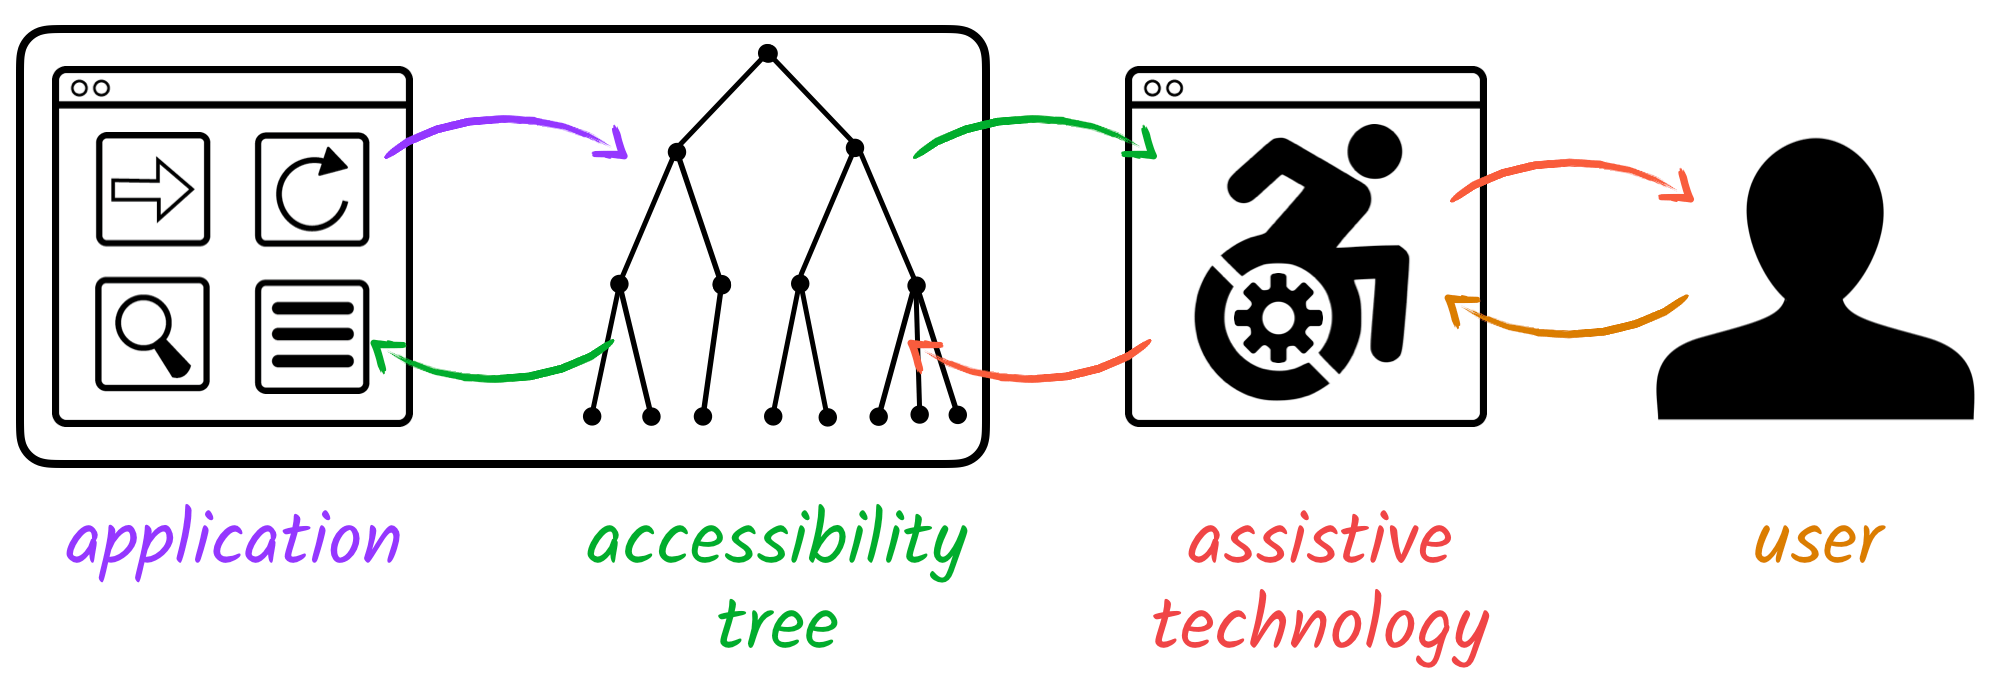 Flow from application UI to accessibility tree to assistive technology to user.